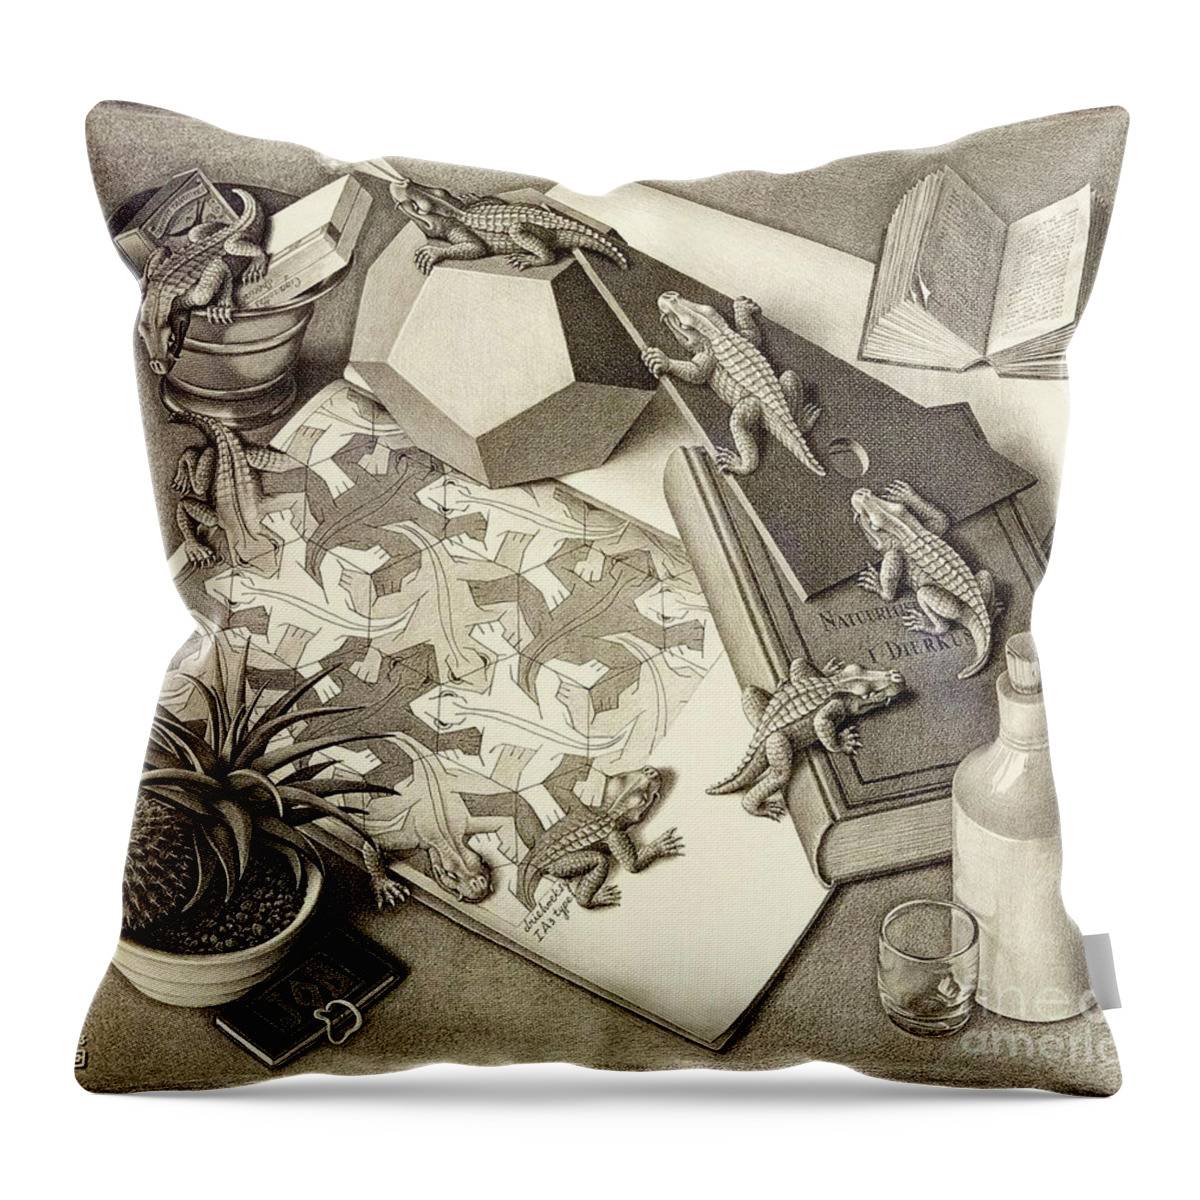 Crocodiles Throw Pillow featuring the drawing Reptiles by MC Escher